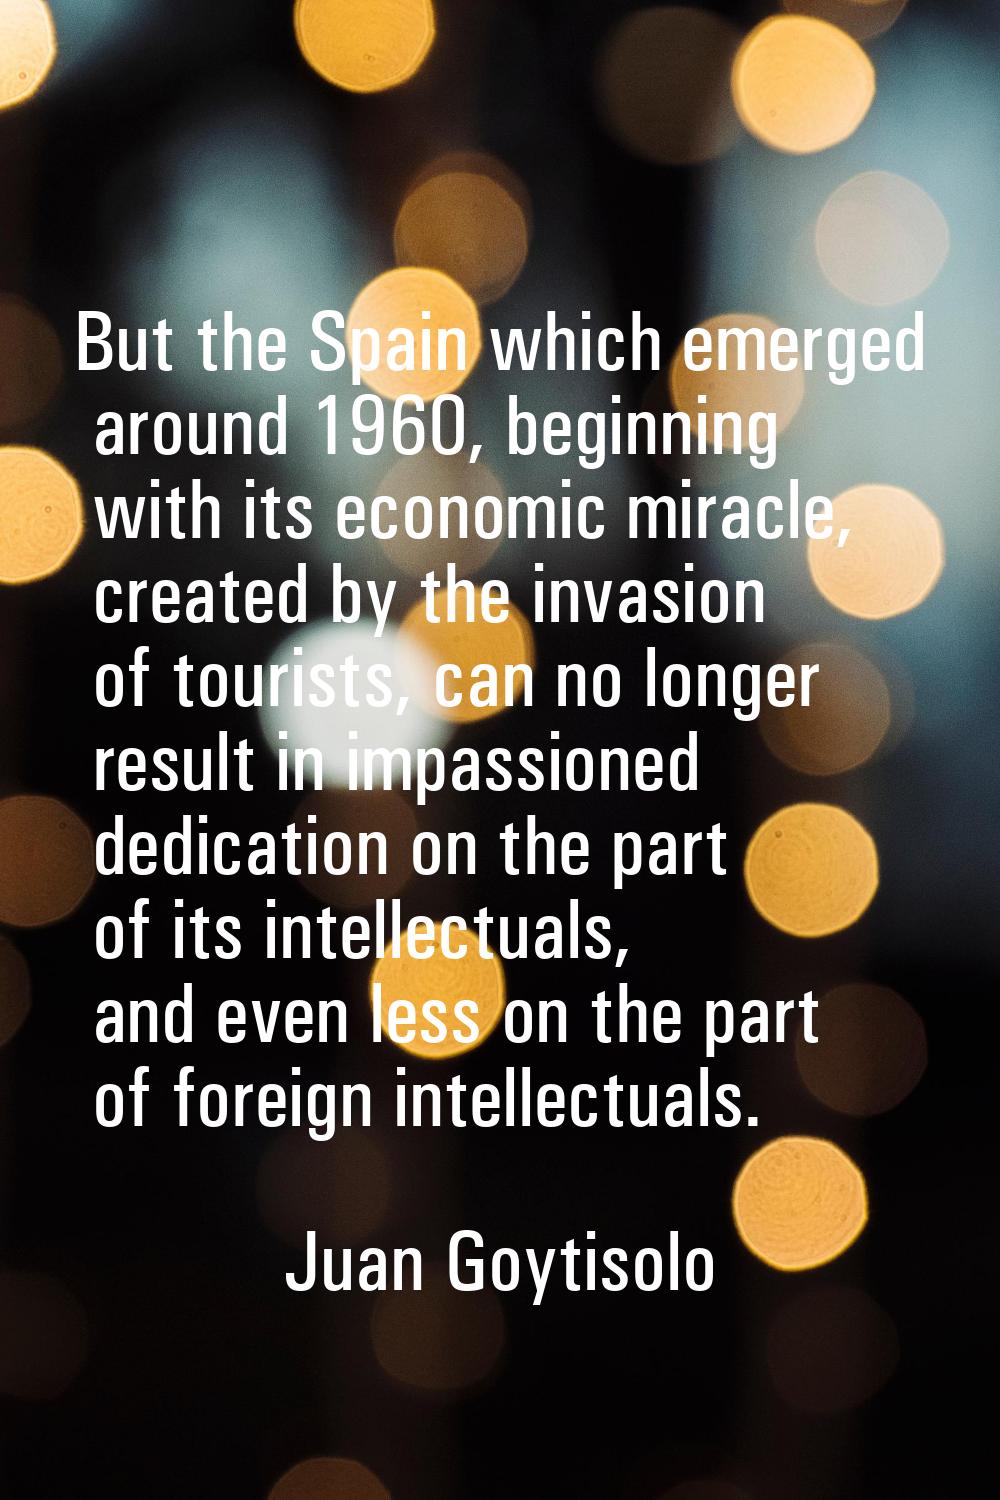 But the Spain which emerged around 1960, beginning with its economic miracle, created by the invasi